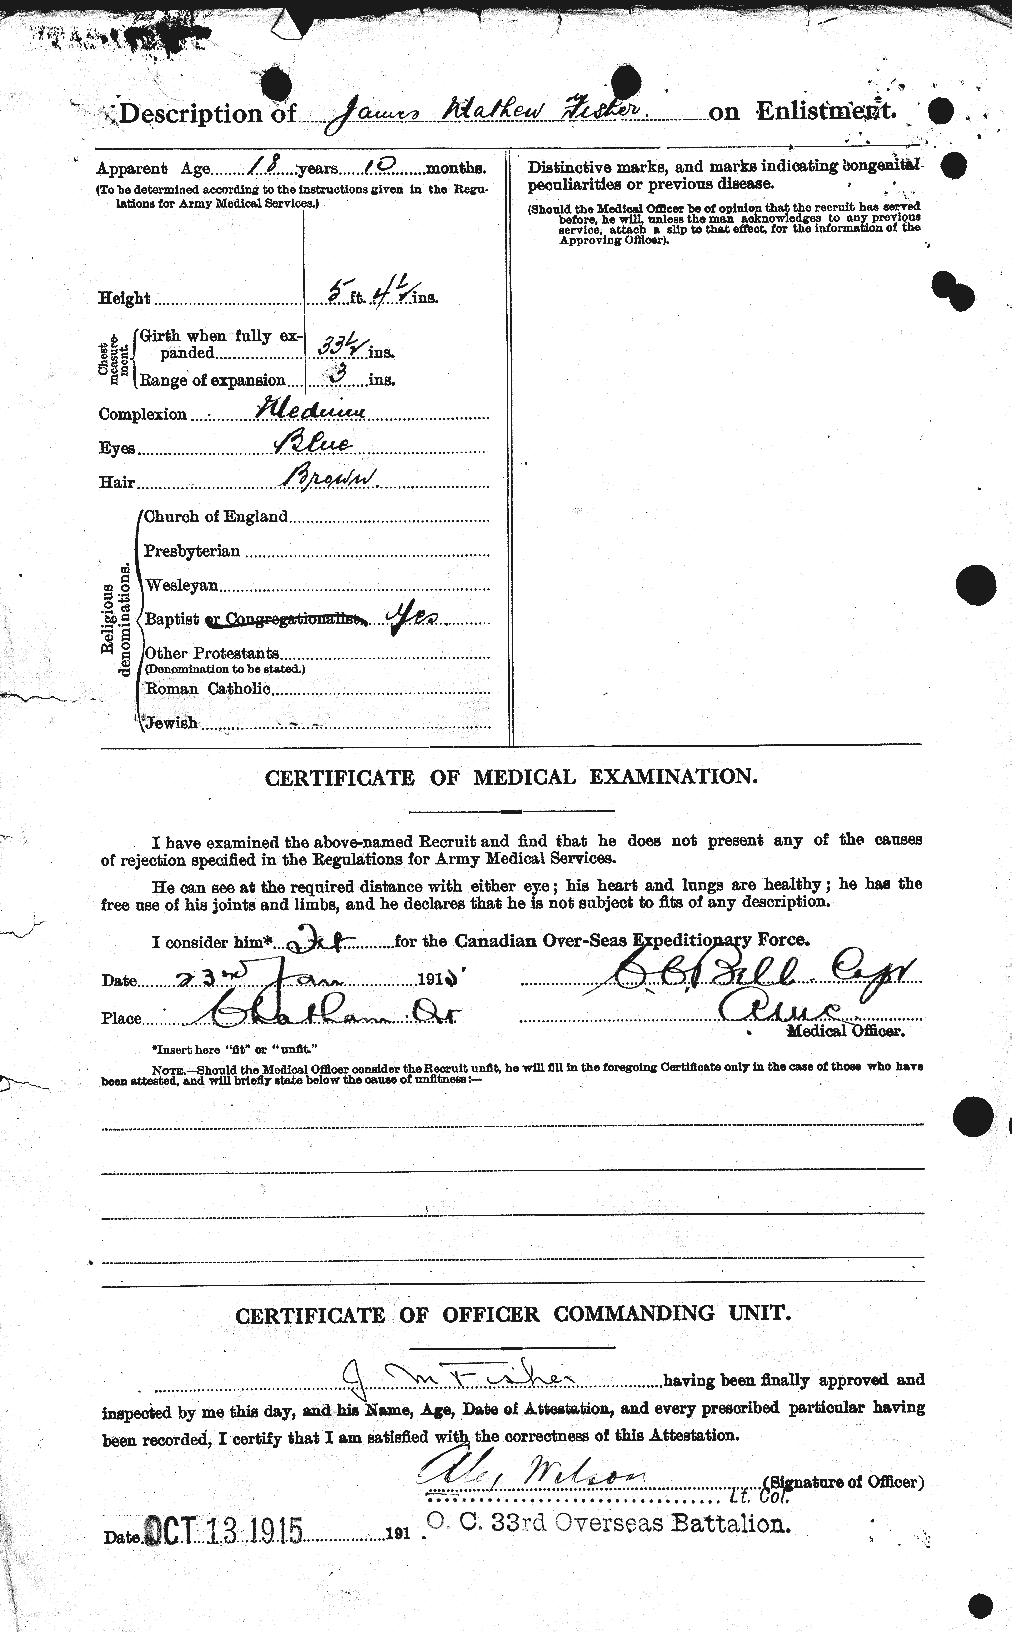 Personnel Records of the First World War - CEF 326885b